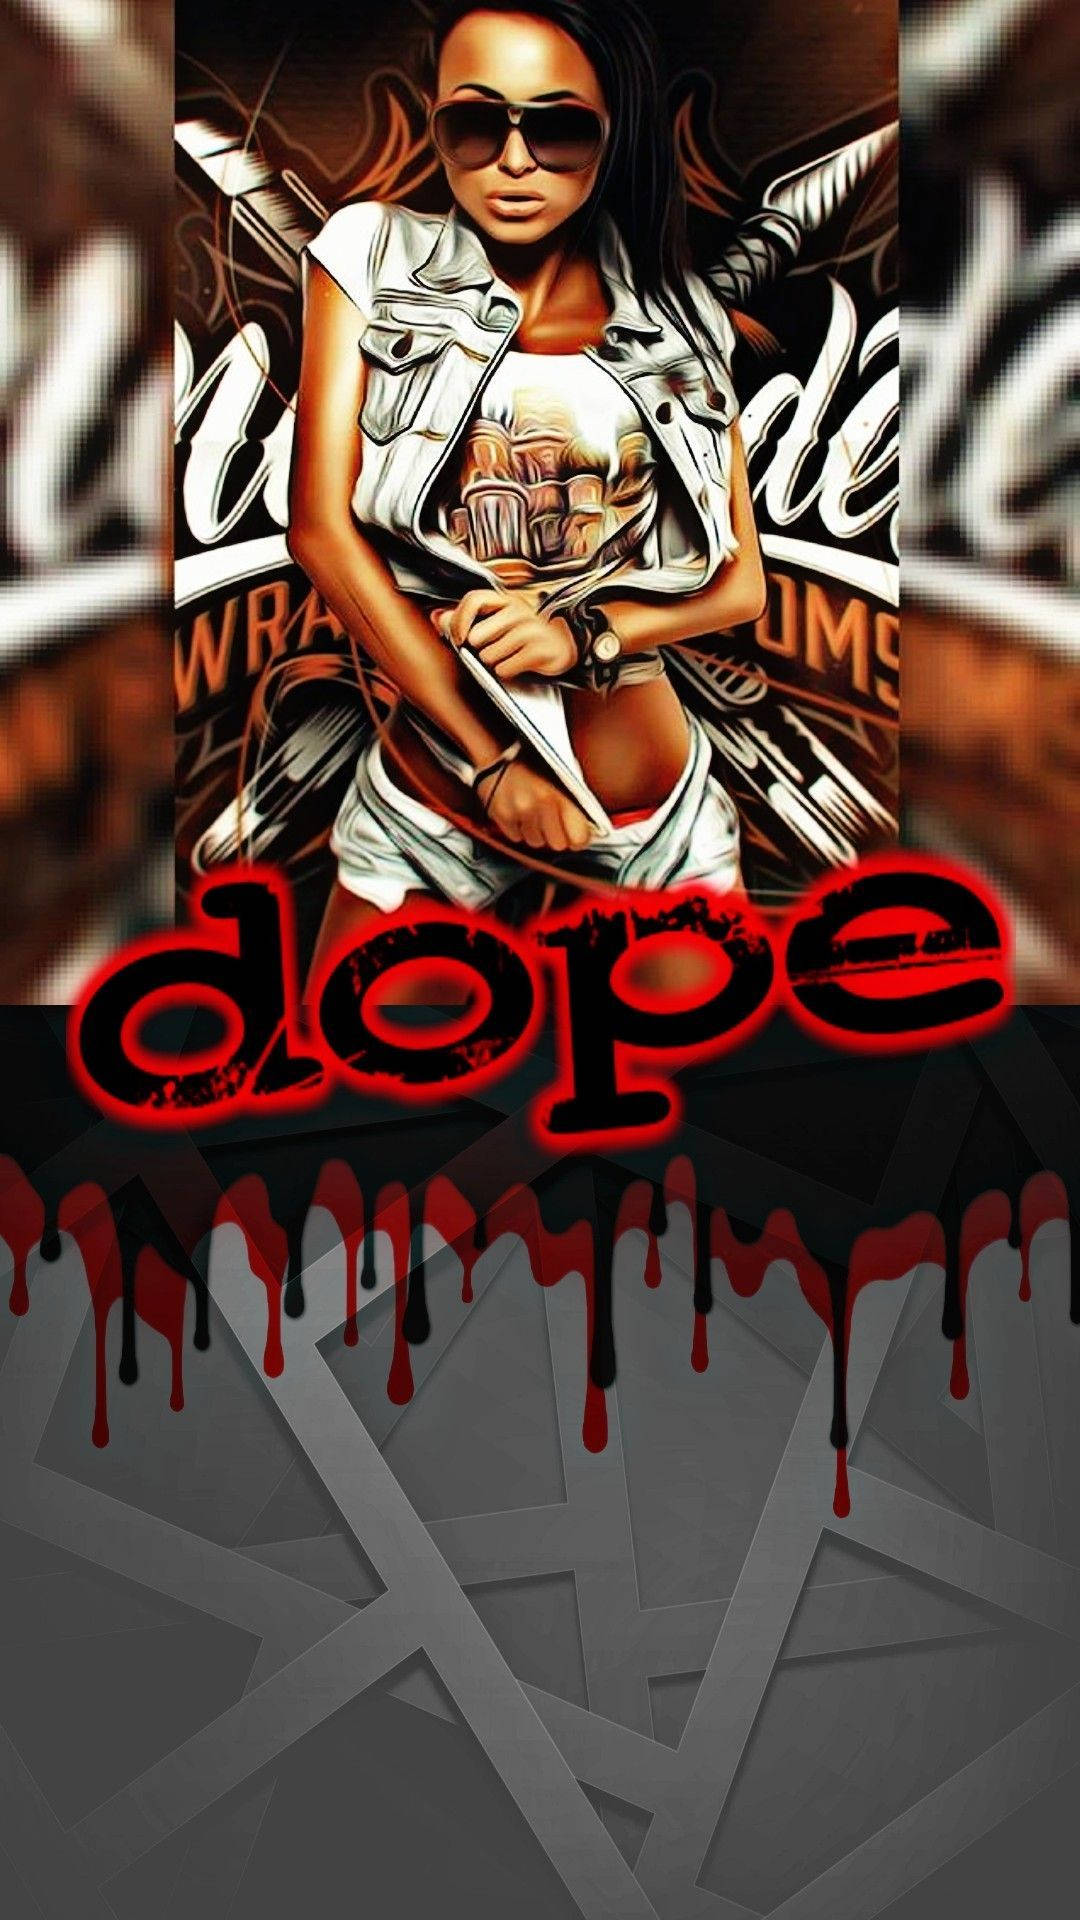 dope couture logo wallpaper